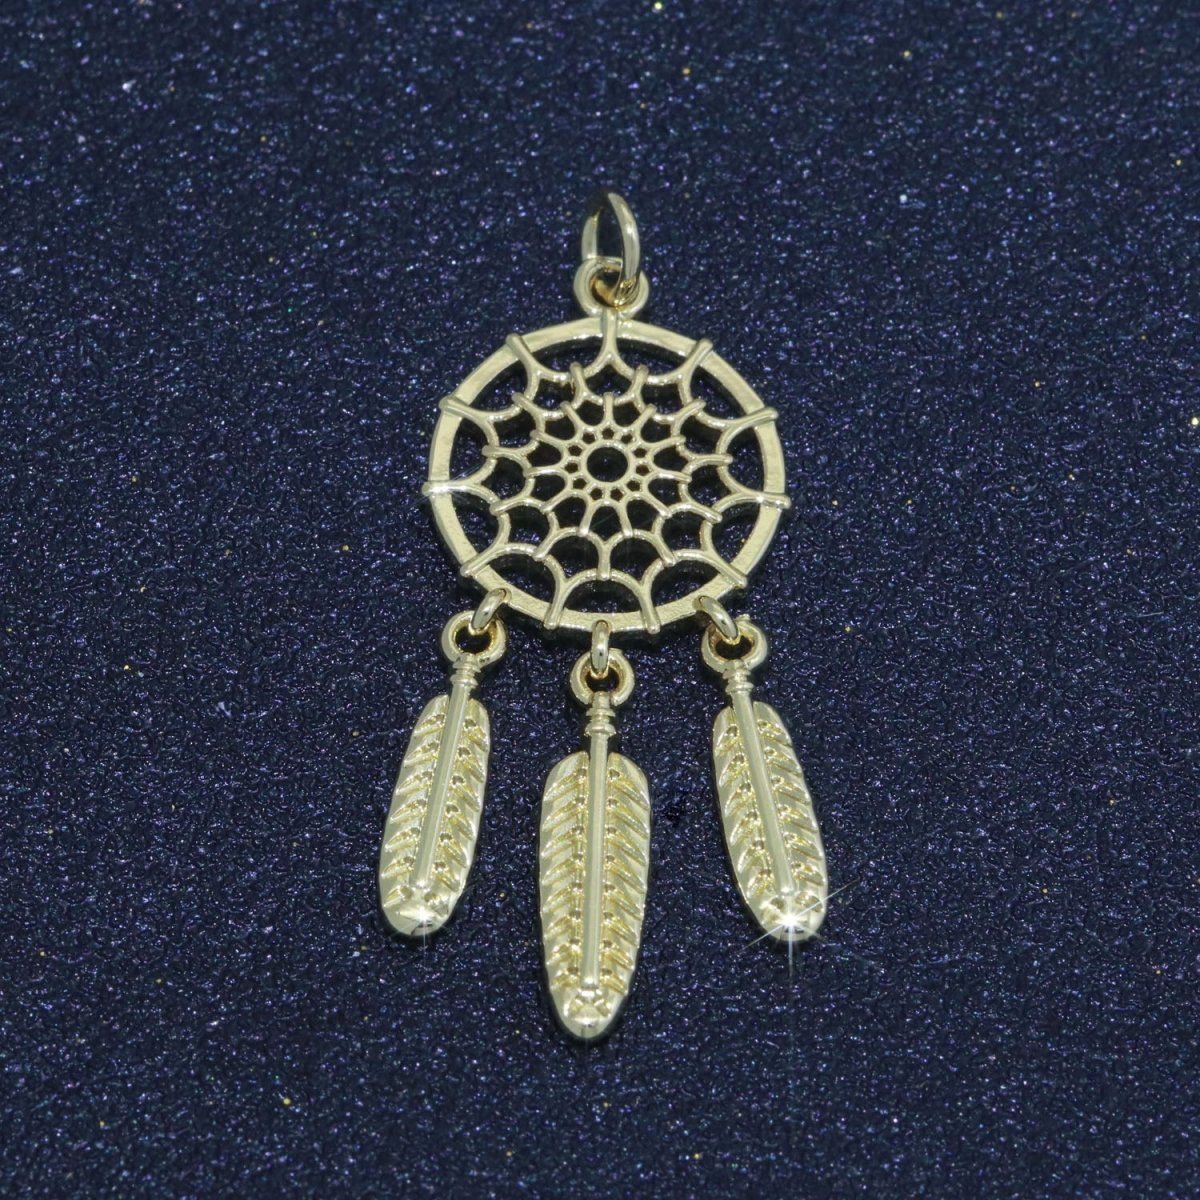 14K Gold Filled Dream Catcher Charm Necklace Pendant Boho Charm for Jewelry Making Feather Indian Bohemian Inspired M-691 - DLUXCA